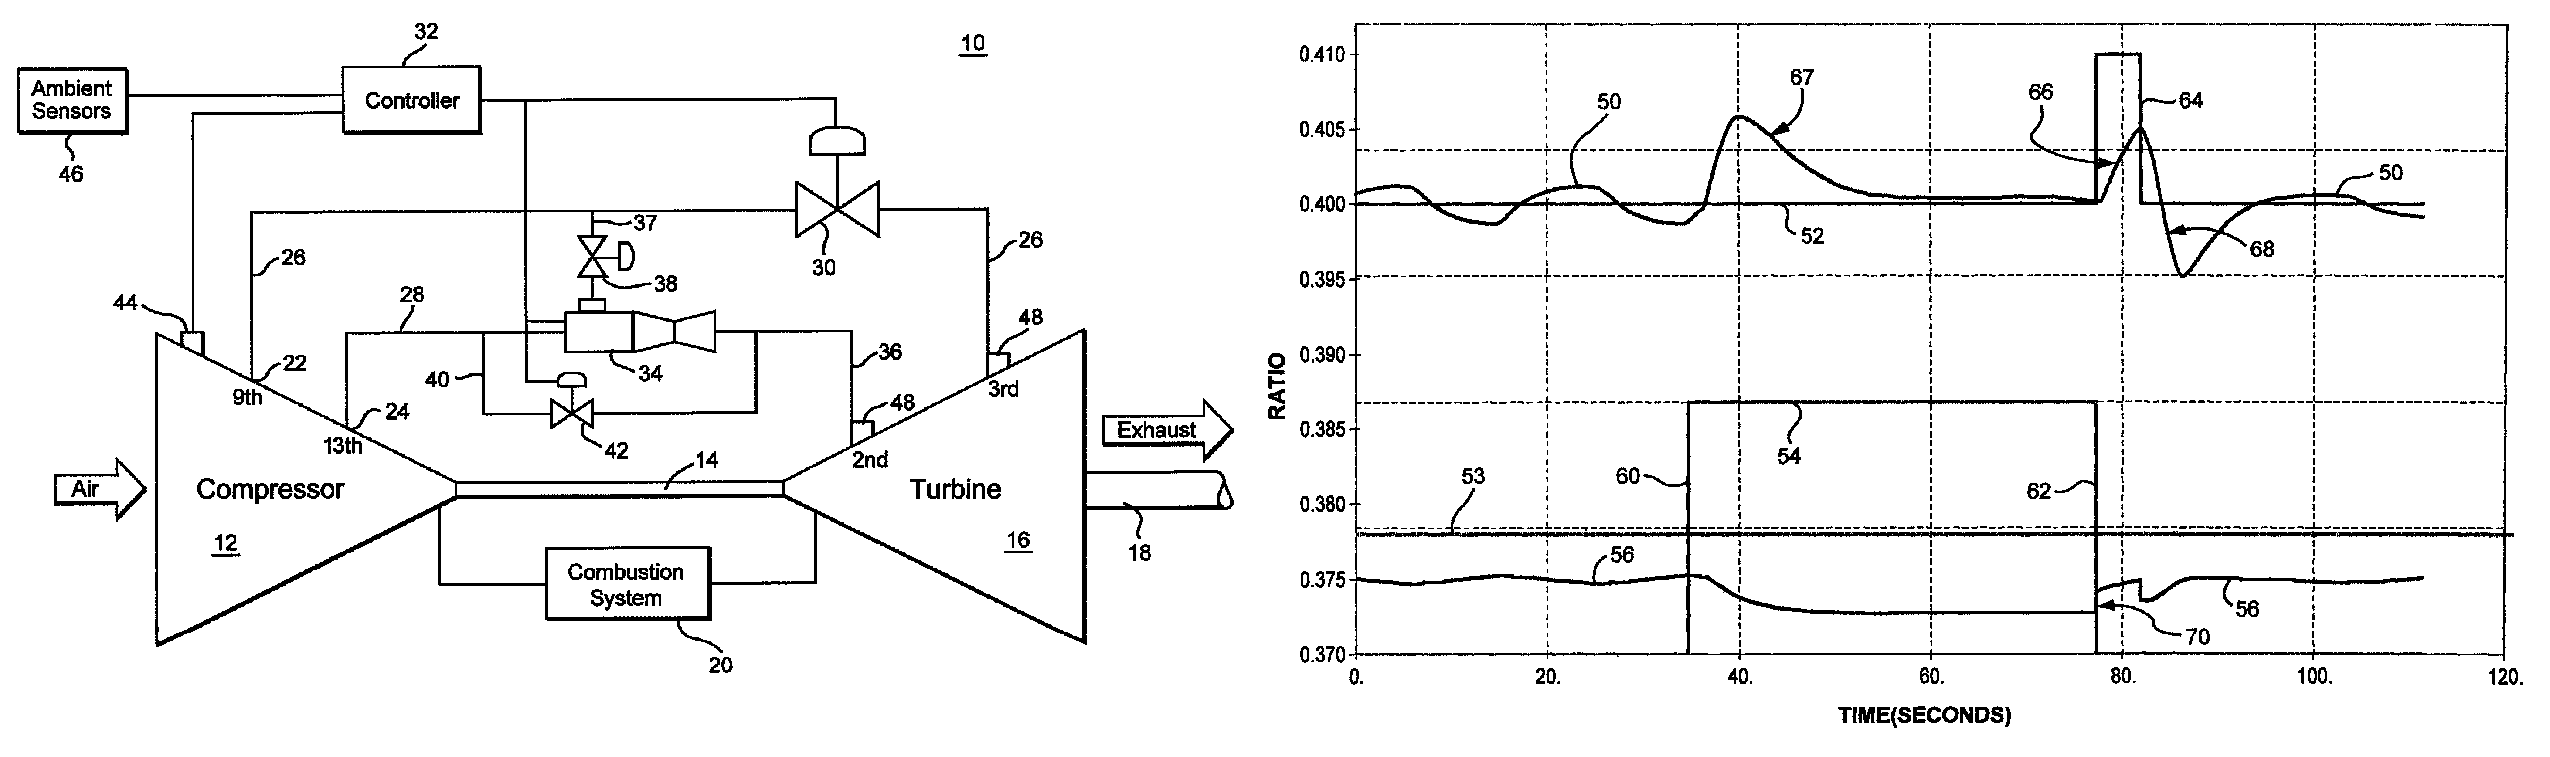 Method and system for controlling a set point for extracting air from a compressor to provide turbine cooling air in a gas turbine